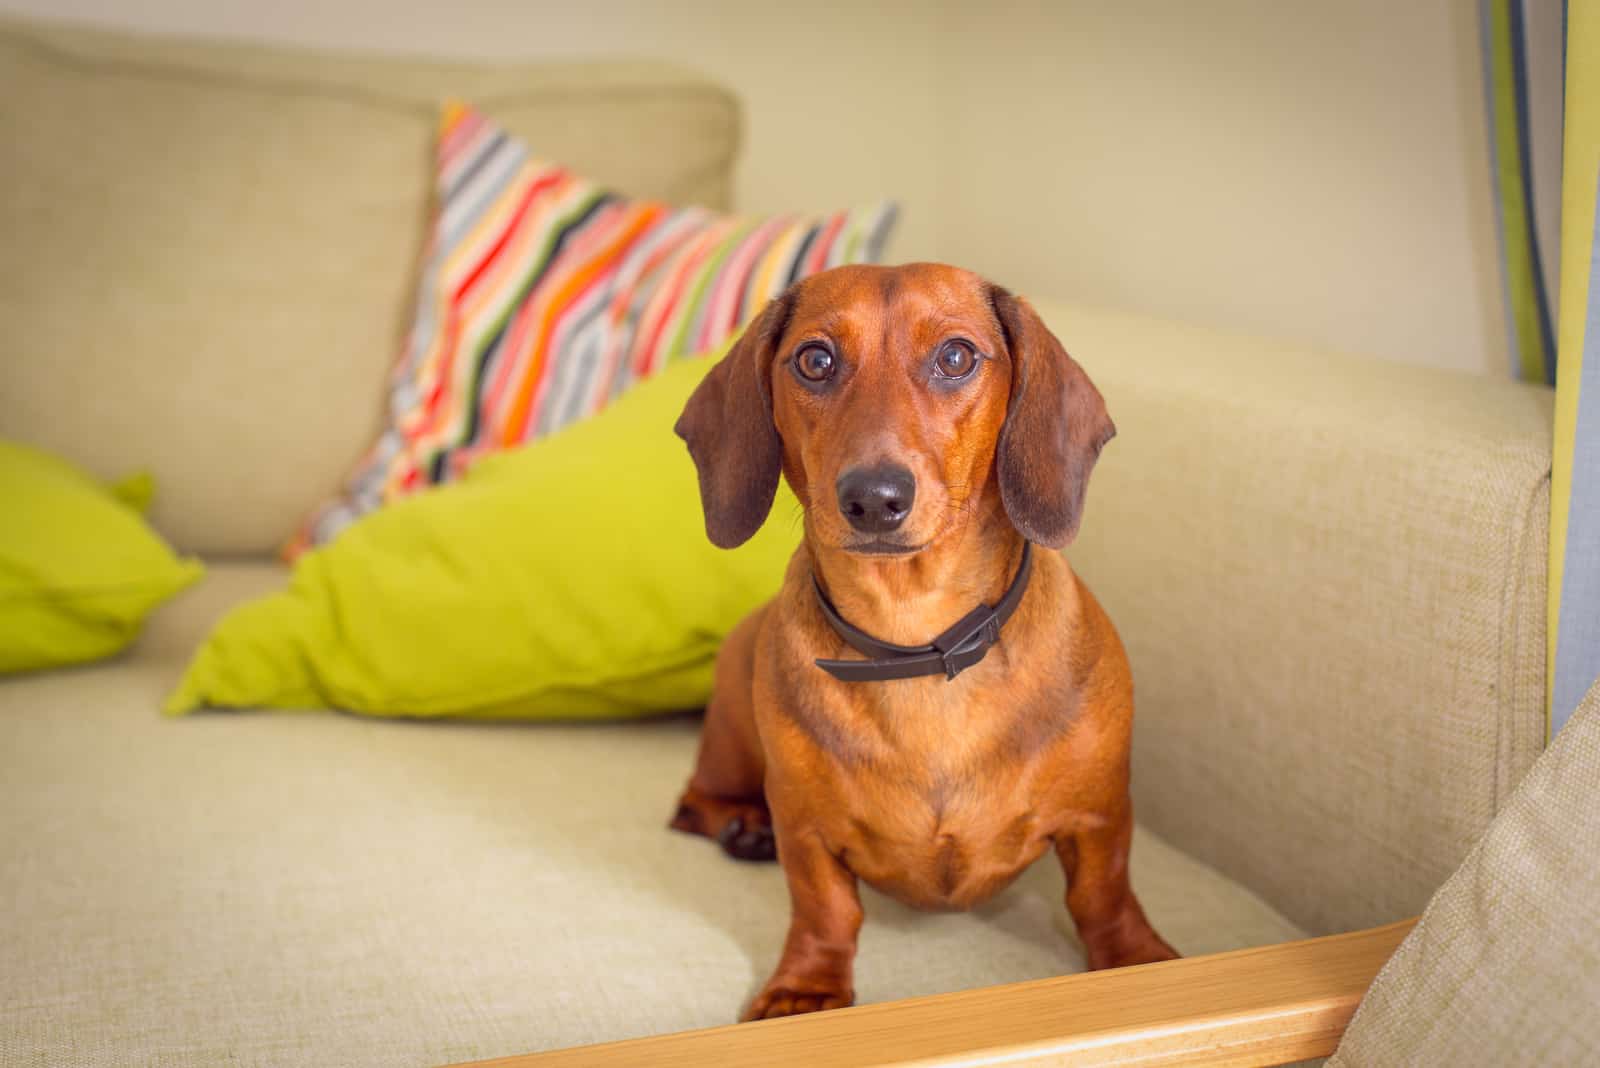 Dachshunds sits on the couch and looks ahead